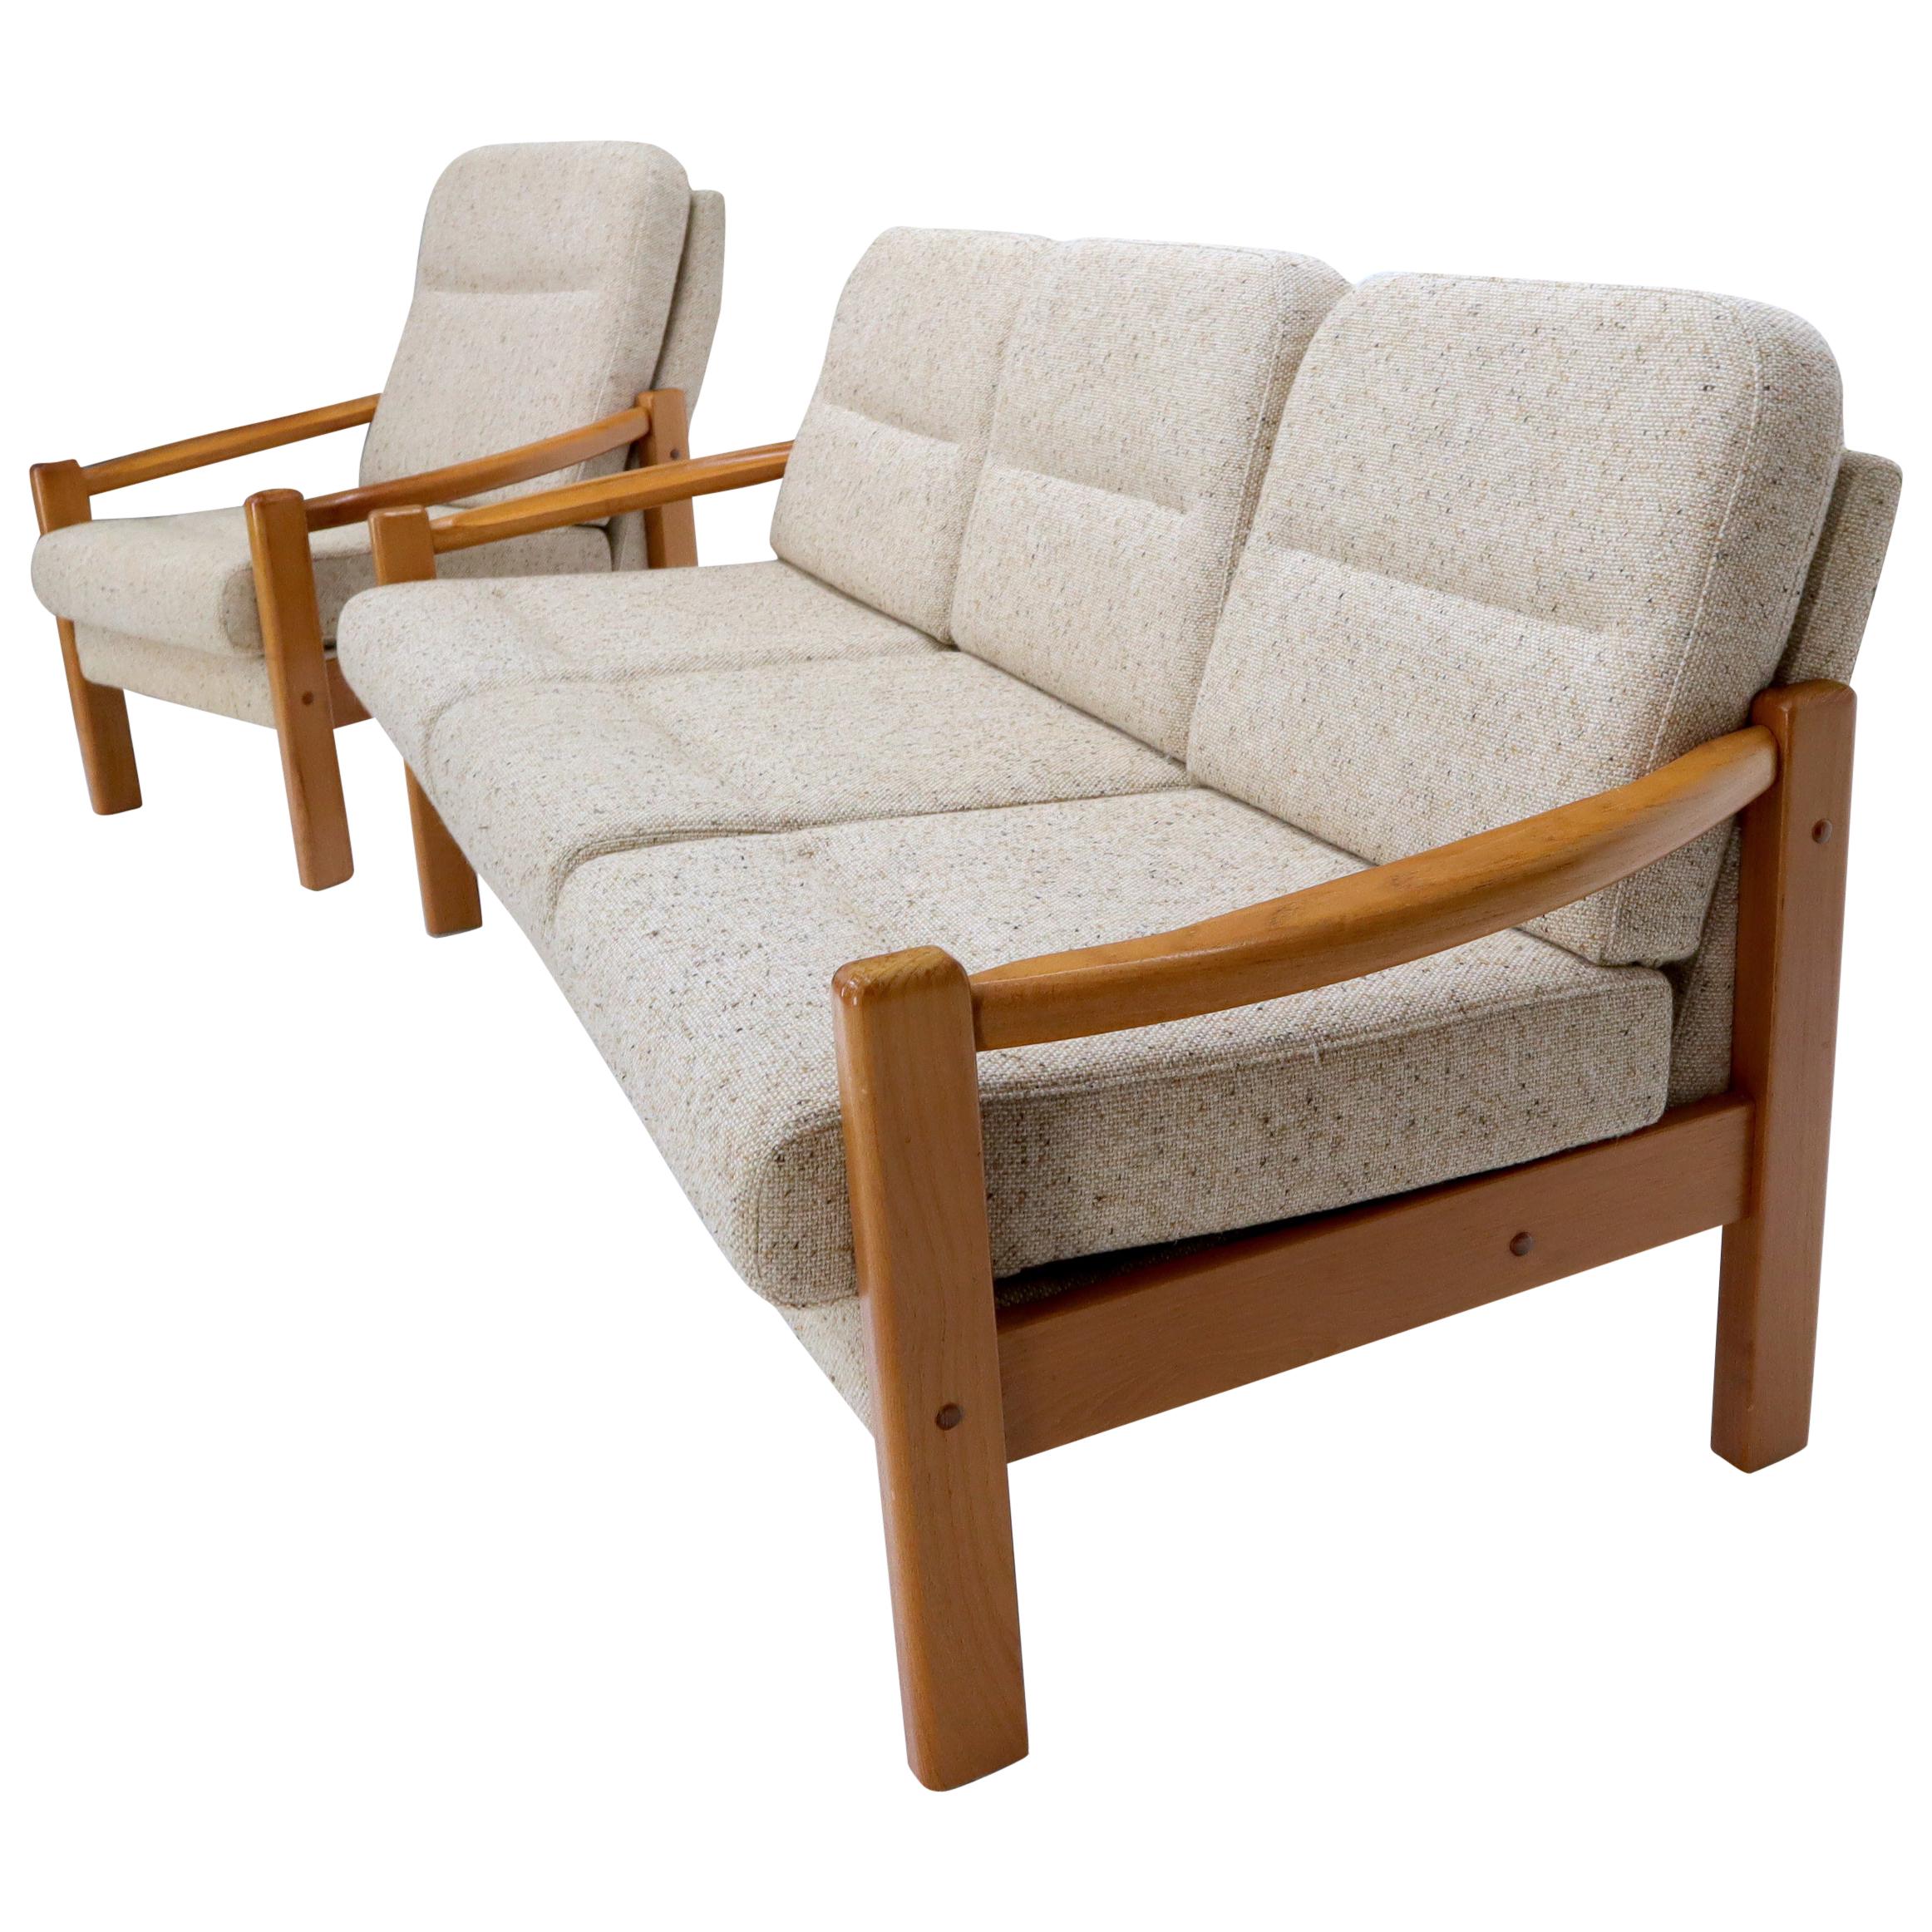 Danish Mid-Century Modern Sofa and Matching Chair Set For Sale at 1stDibs